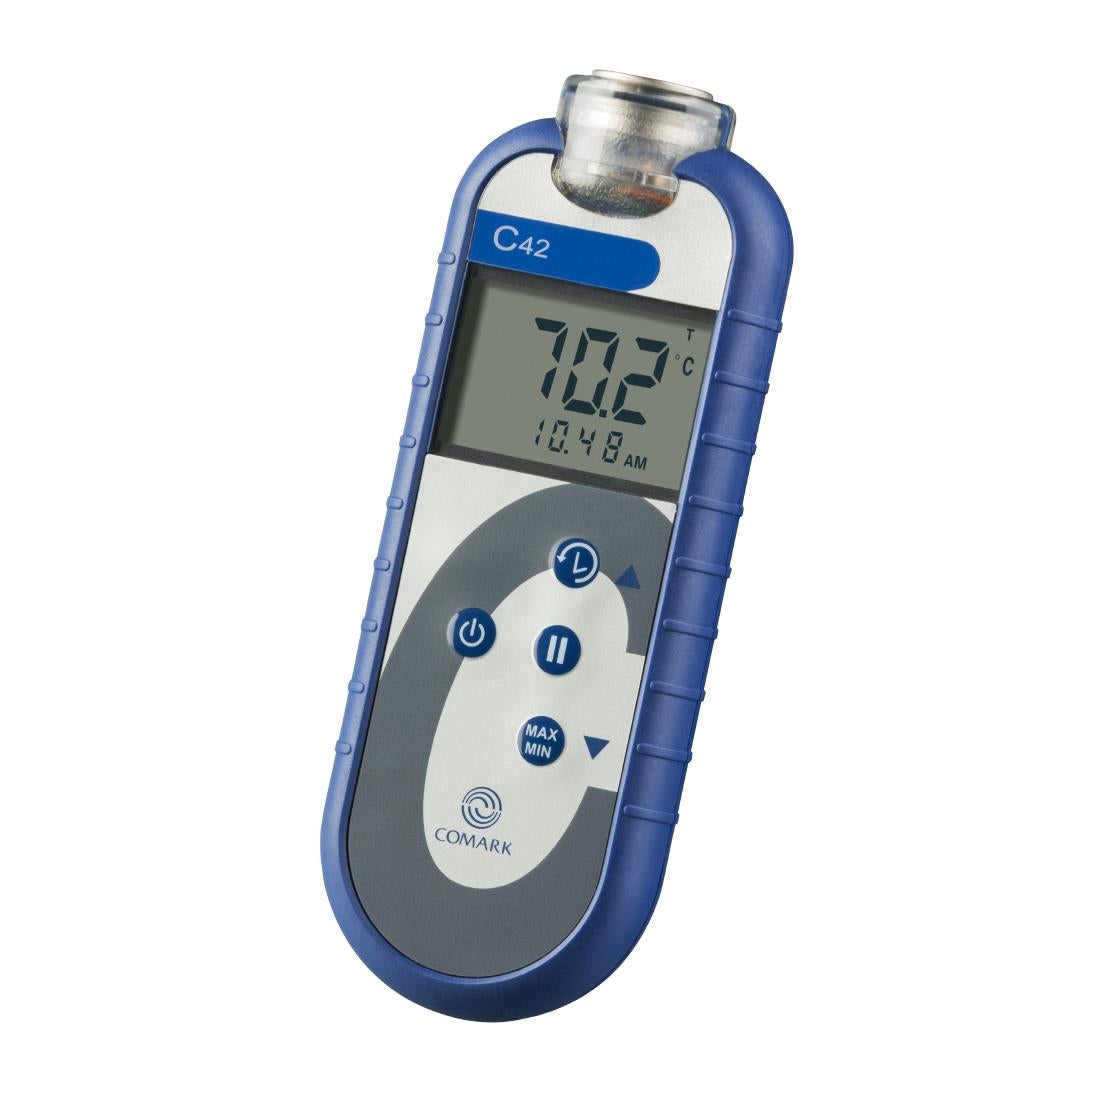 CU745 Comark C42C High Performance Thermometer JD Catering Equipment Solutions Ltd